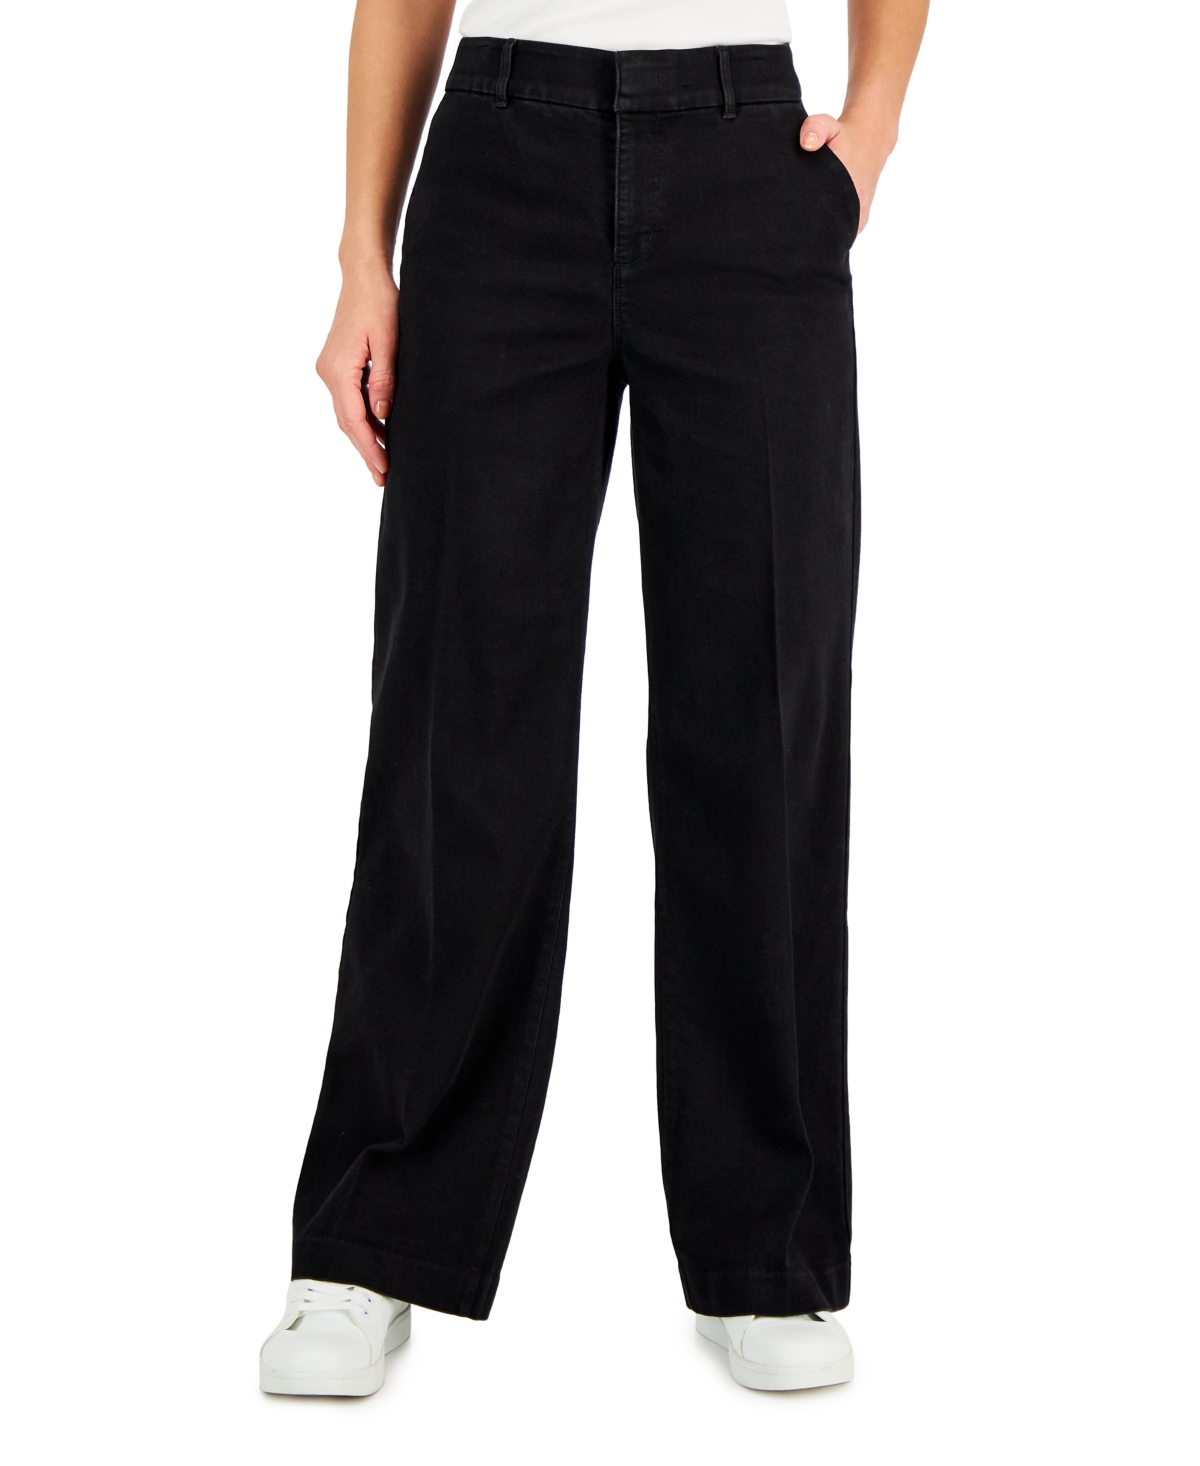  Charter Club Women's High-Rise Wide-Leg Black Jeans, Created for Macy's